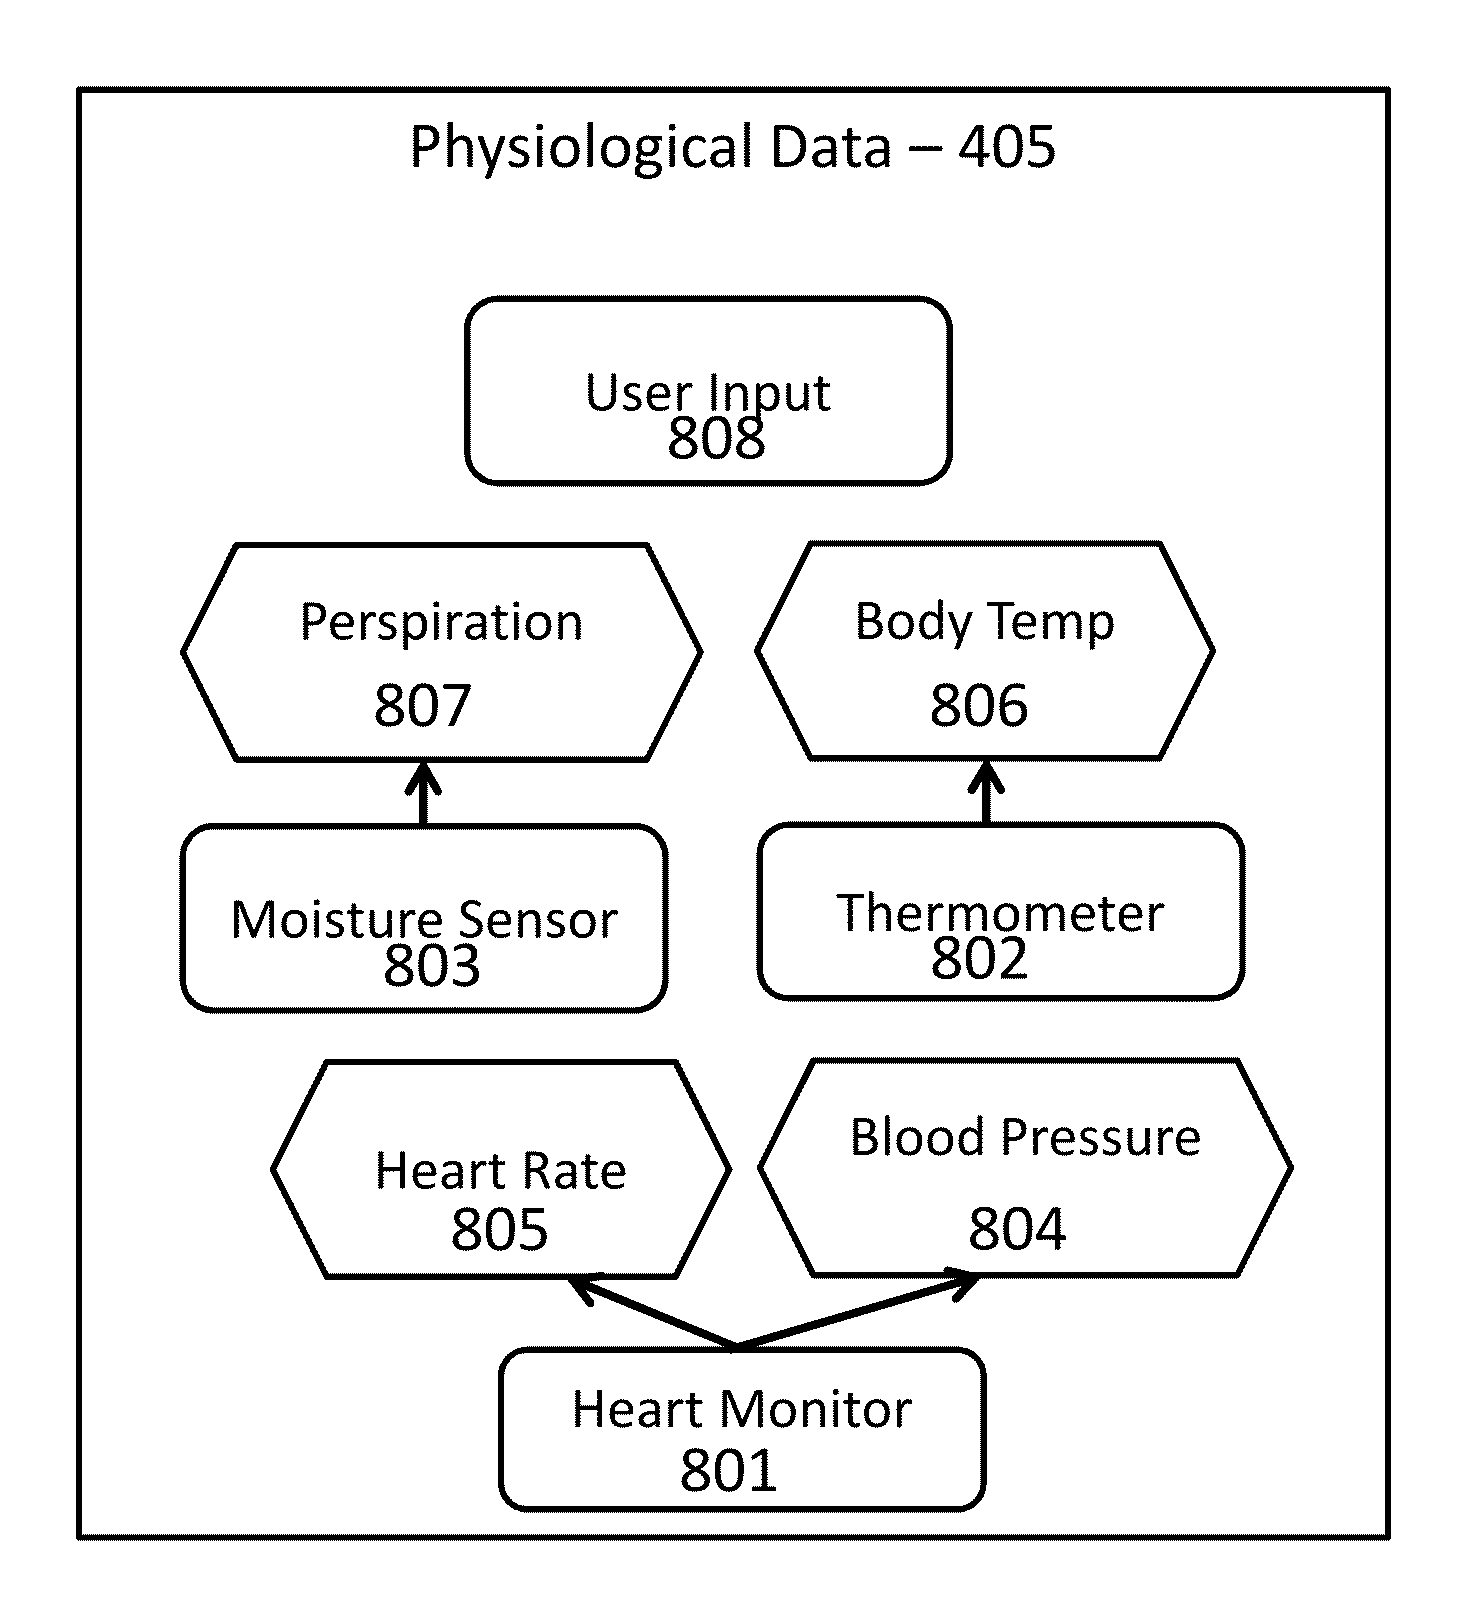 Methods and systems for managing motion sickness